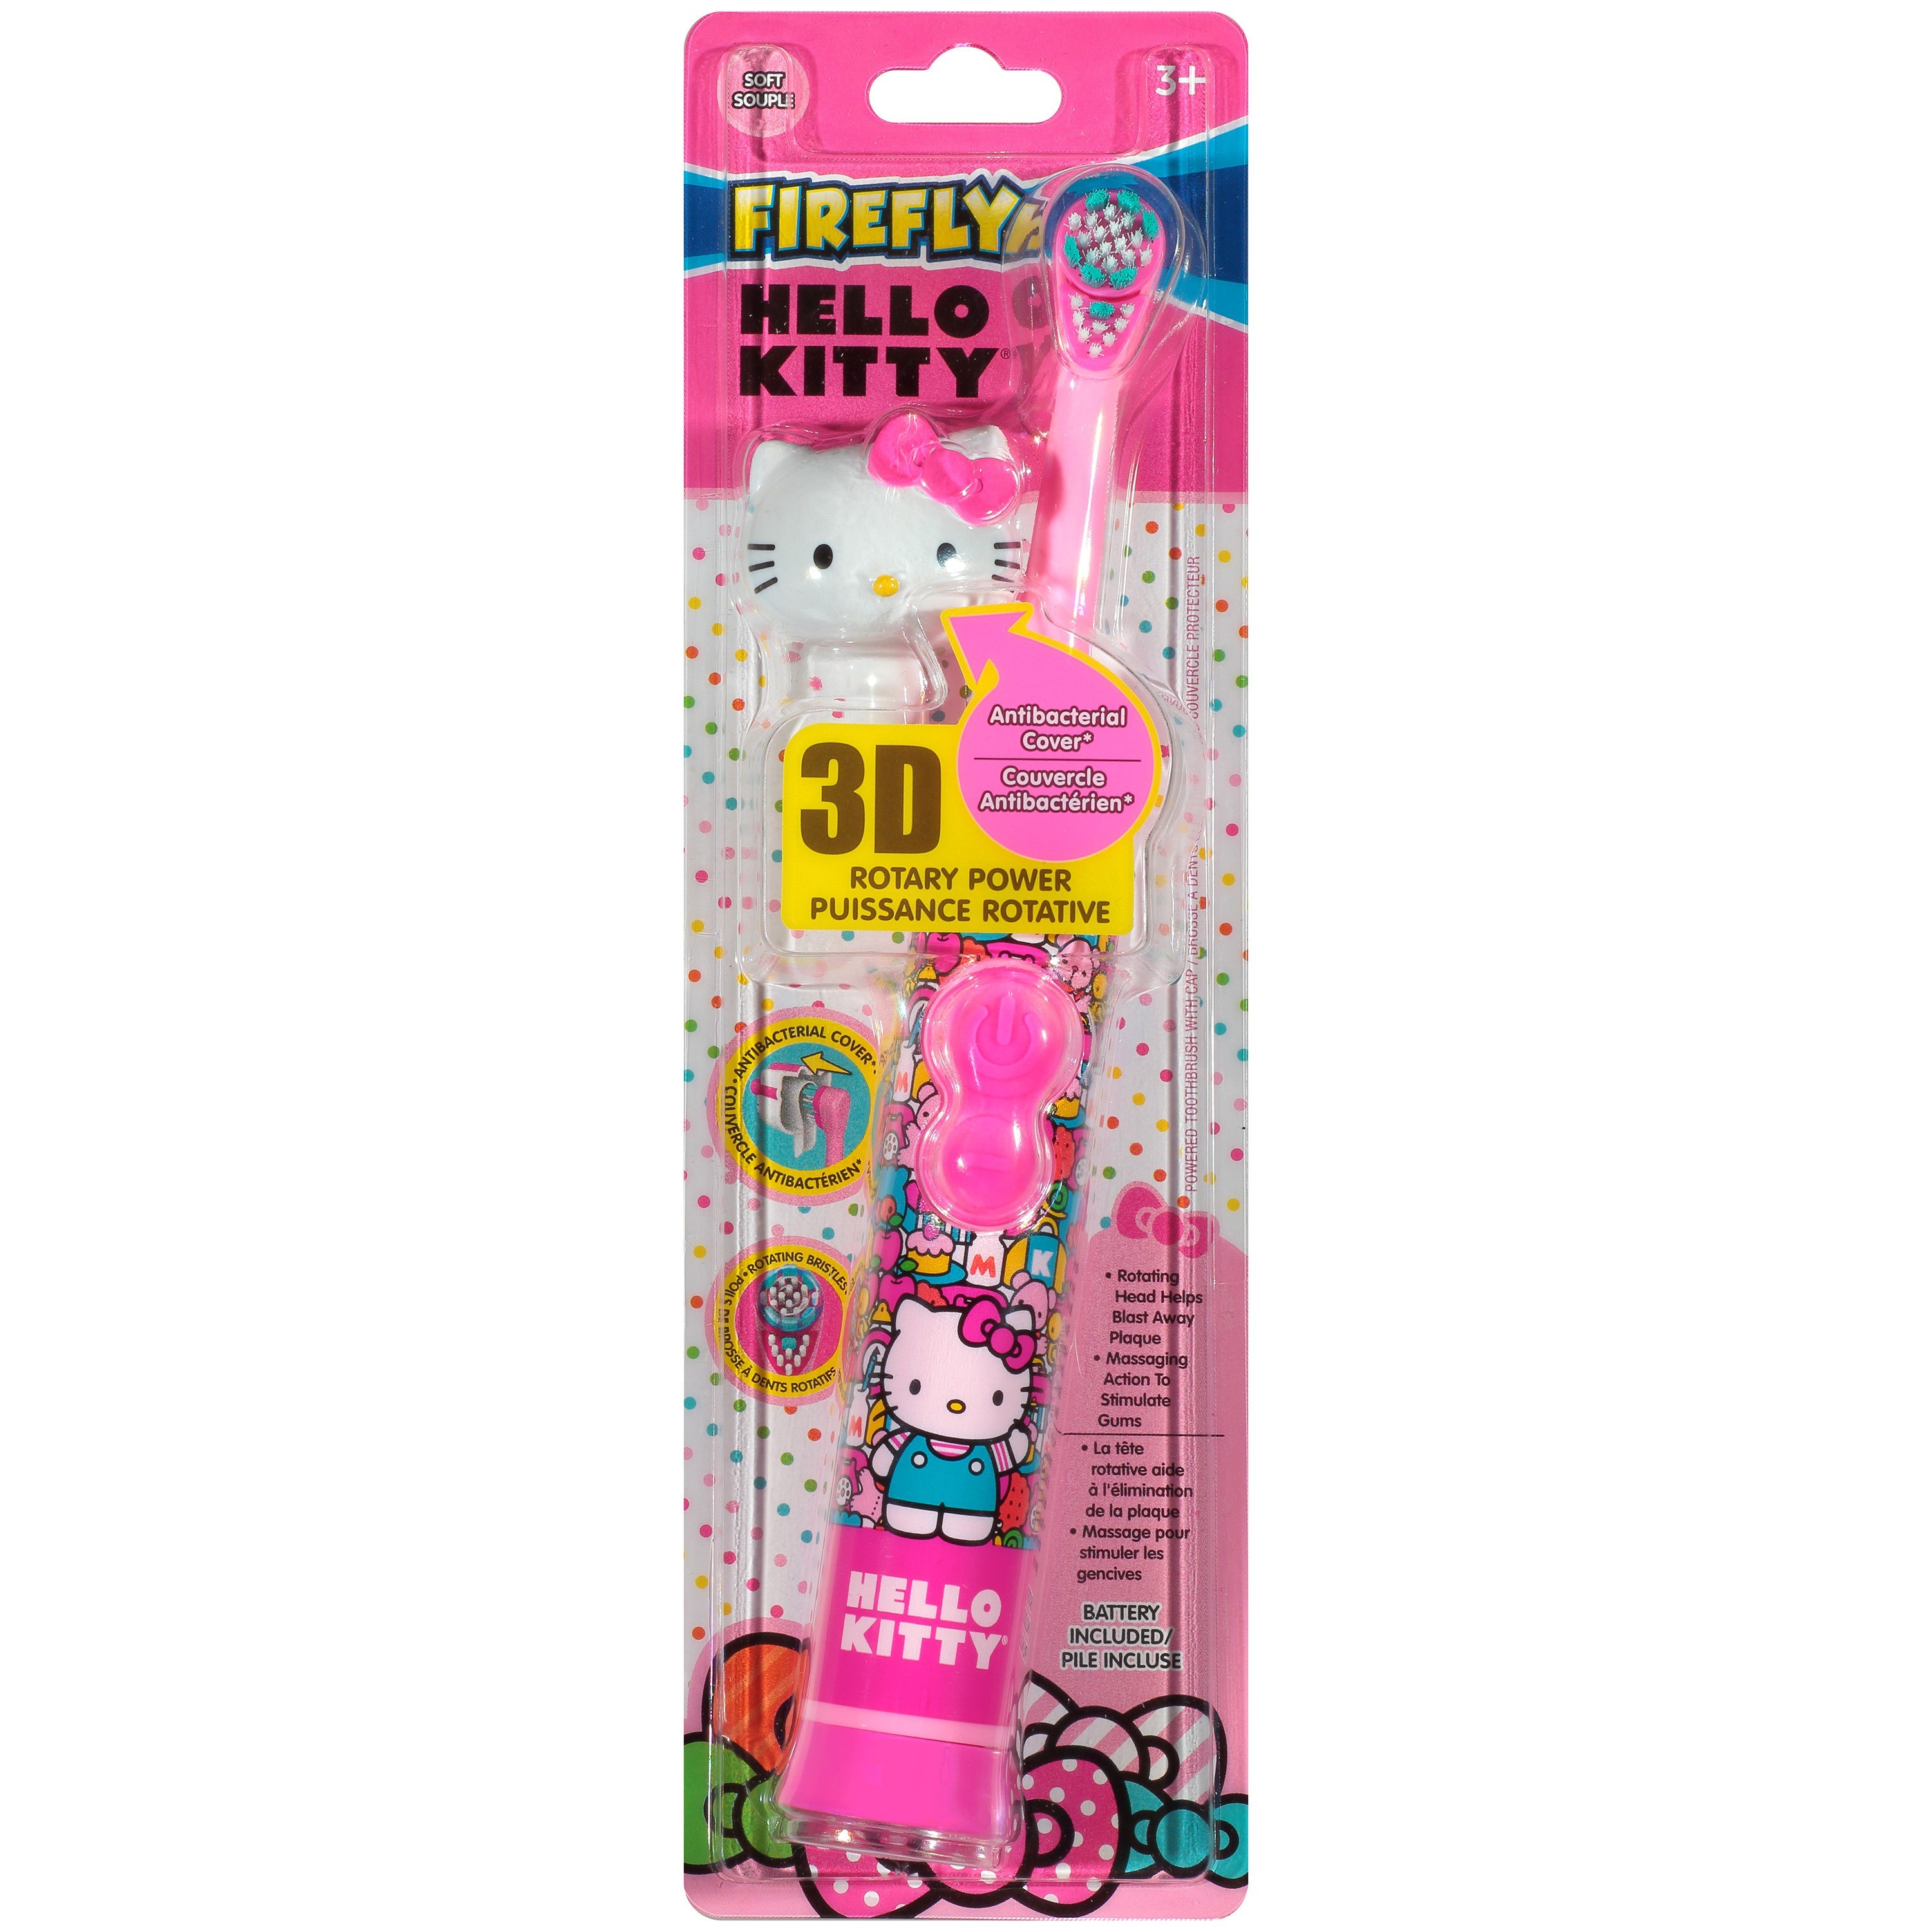 Firefly Hello Kitty Power Toothbrush with Cover, Battery Included, Ages 3+ - image 1 of 10